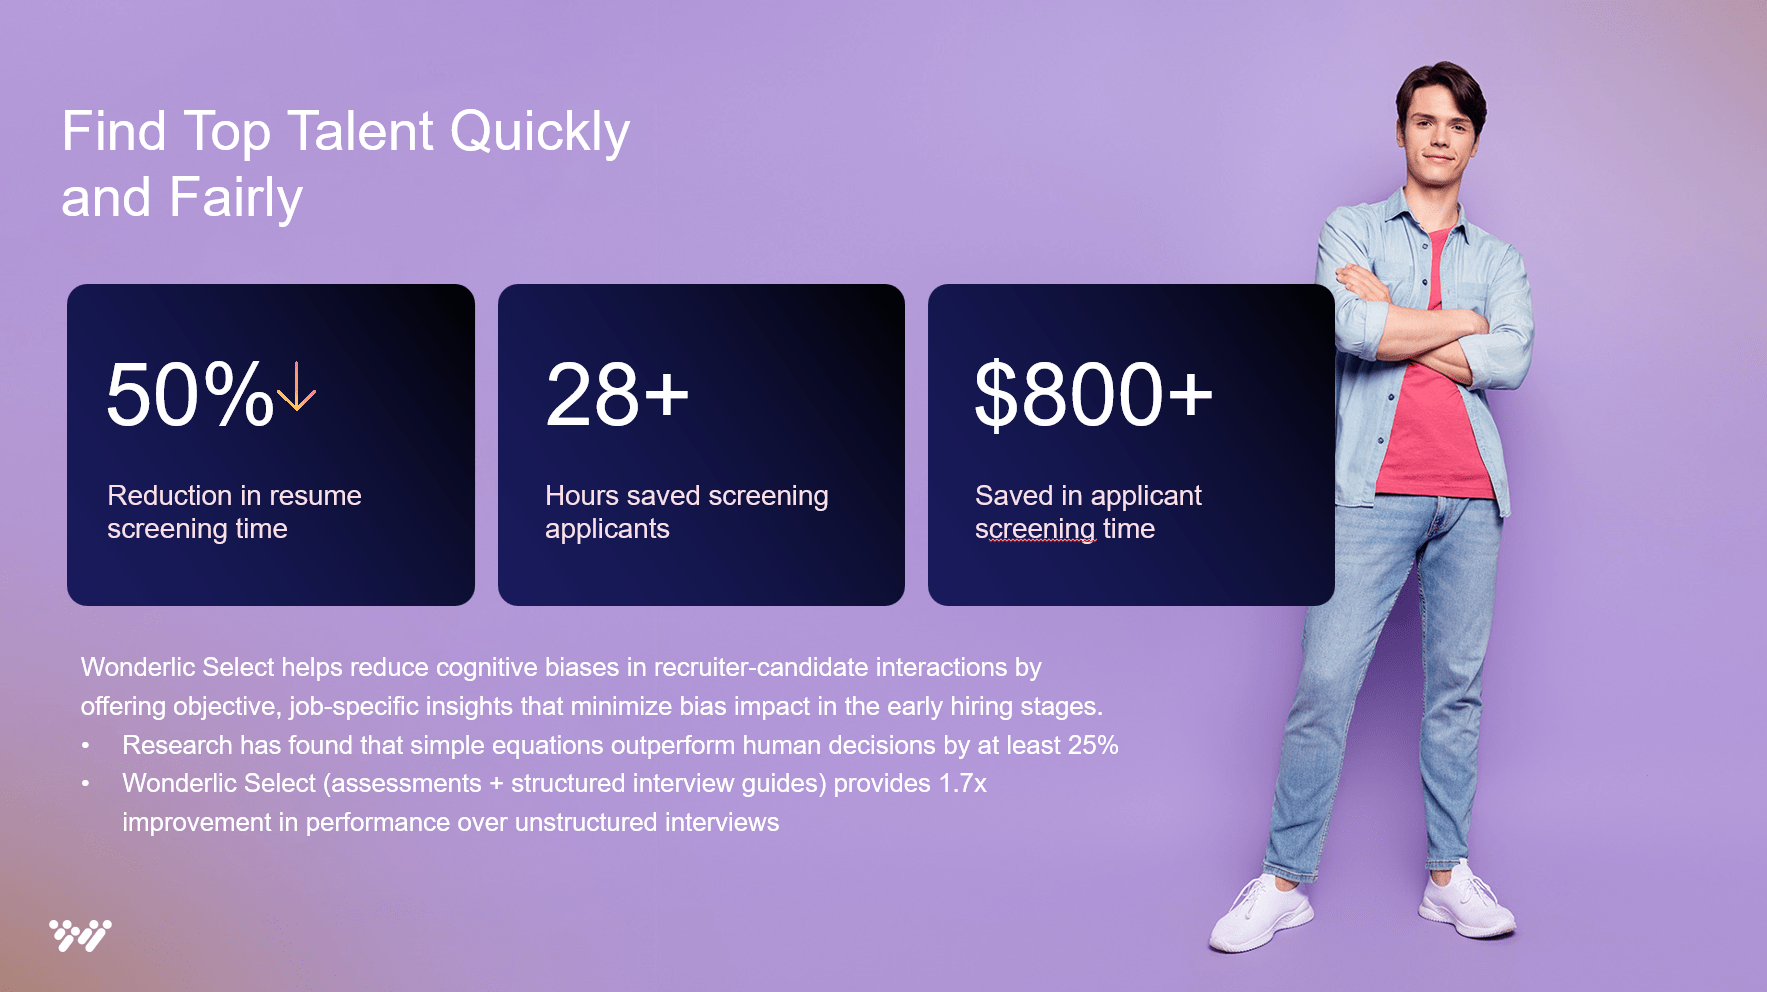 A promotional image for Wunderlic Select featuring a person in a casual outfit, standing on the right with arms crossed. On the left, text highlights an efficient hiring process with benefits including a 50% reduction in resume screening time, 28+ hours saved weekly, and over $800 saved in applicant screening costs.